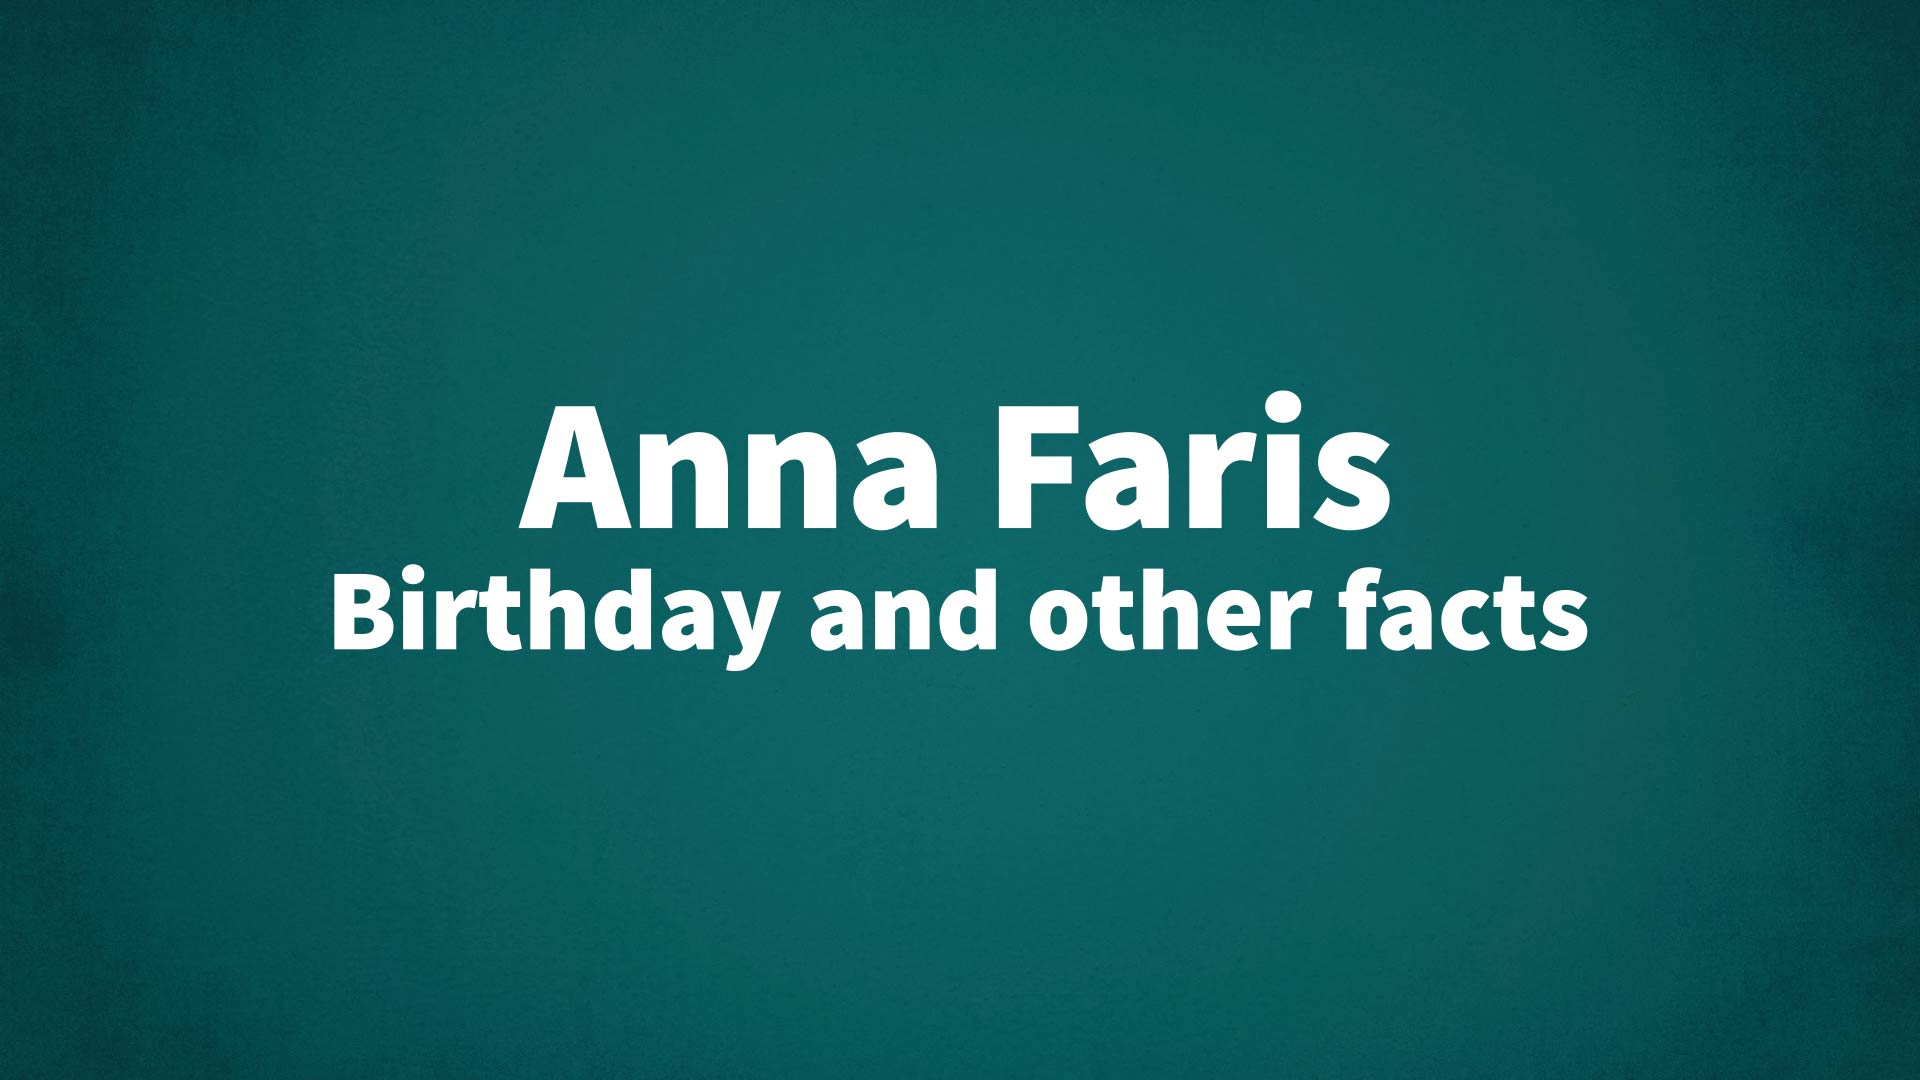 Anna Faris - Birthday and other facts